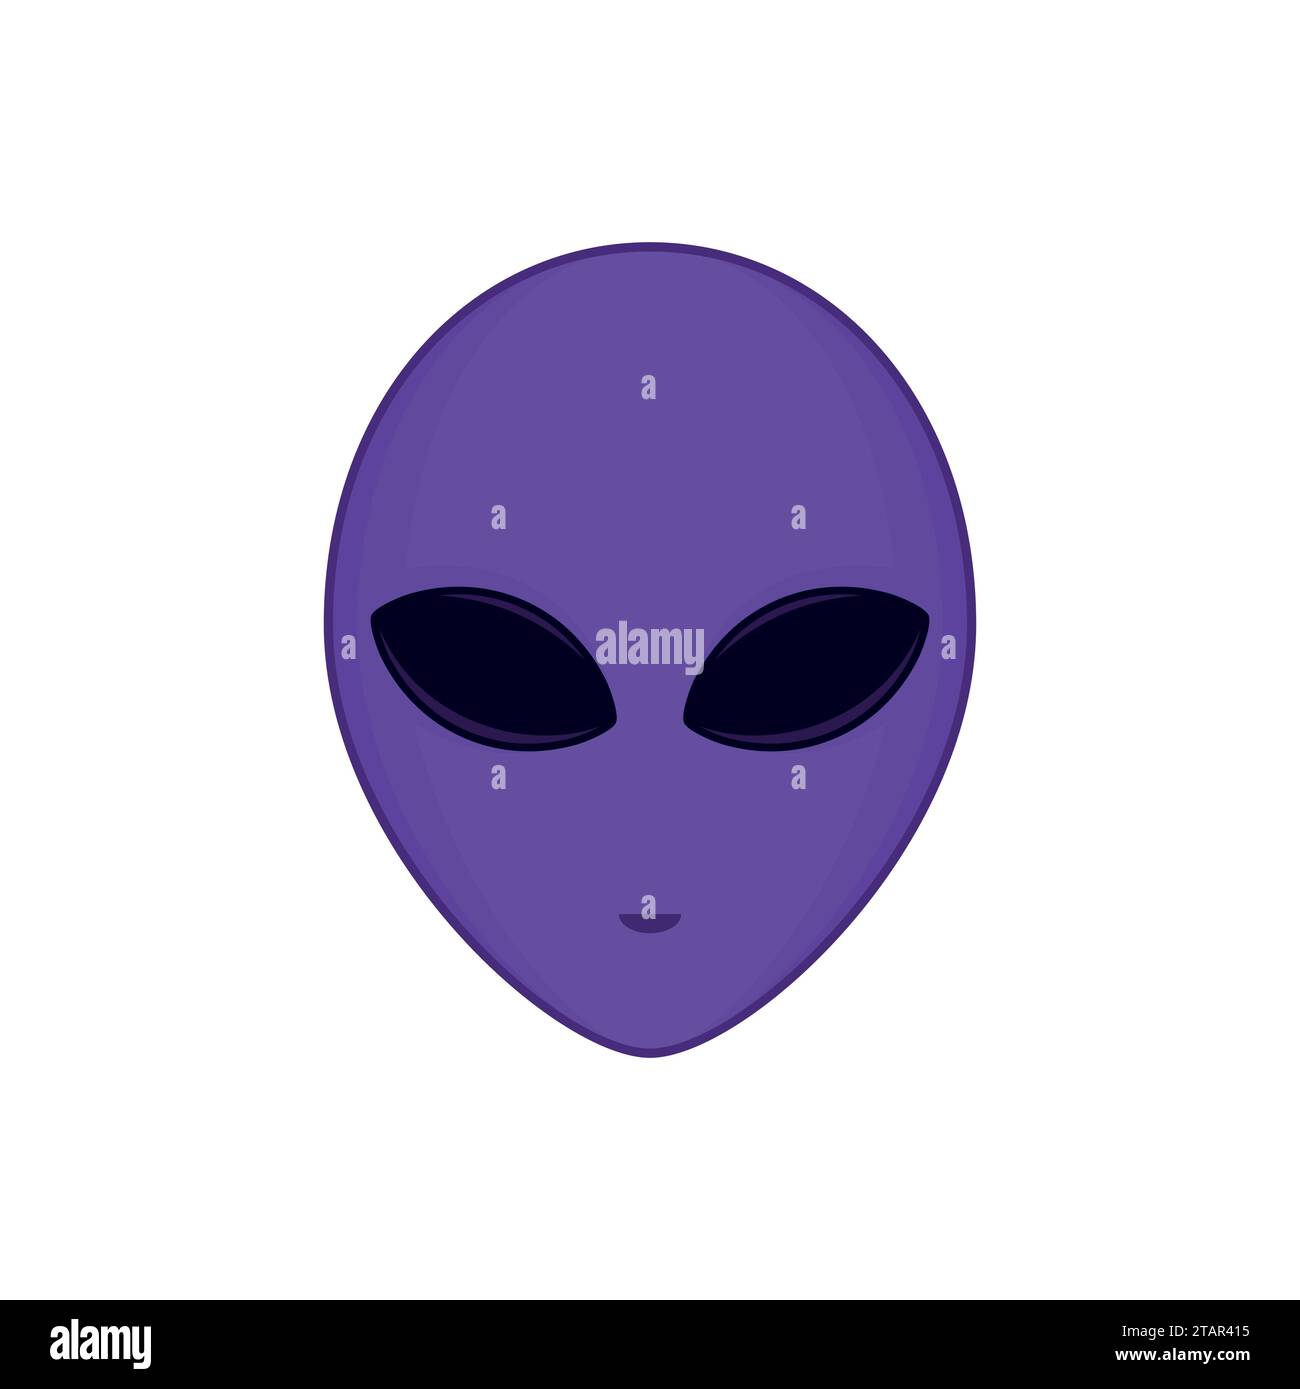 Alien face with large eyes isolated on white background. Extraterrestrial humanoid head. Vector illustration Stock Vector